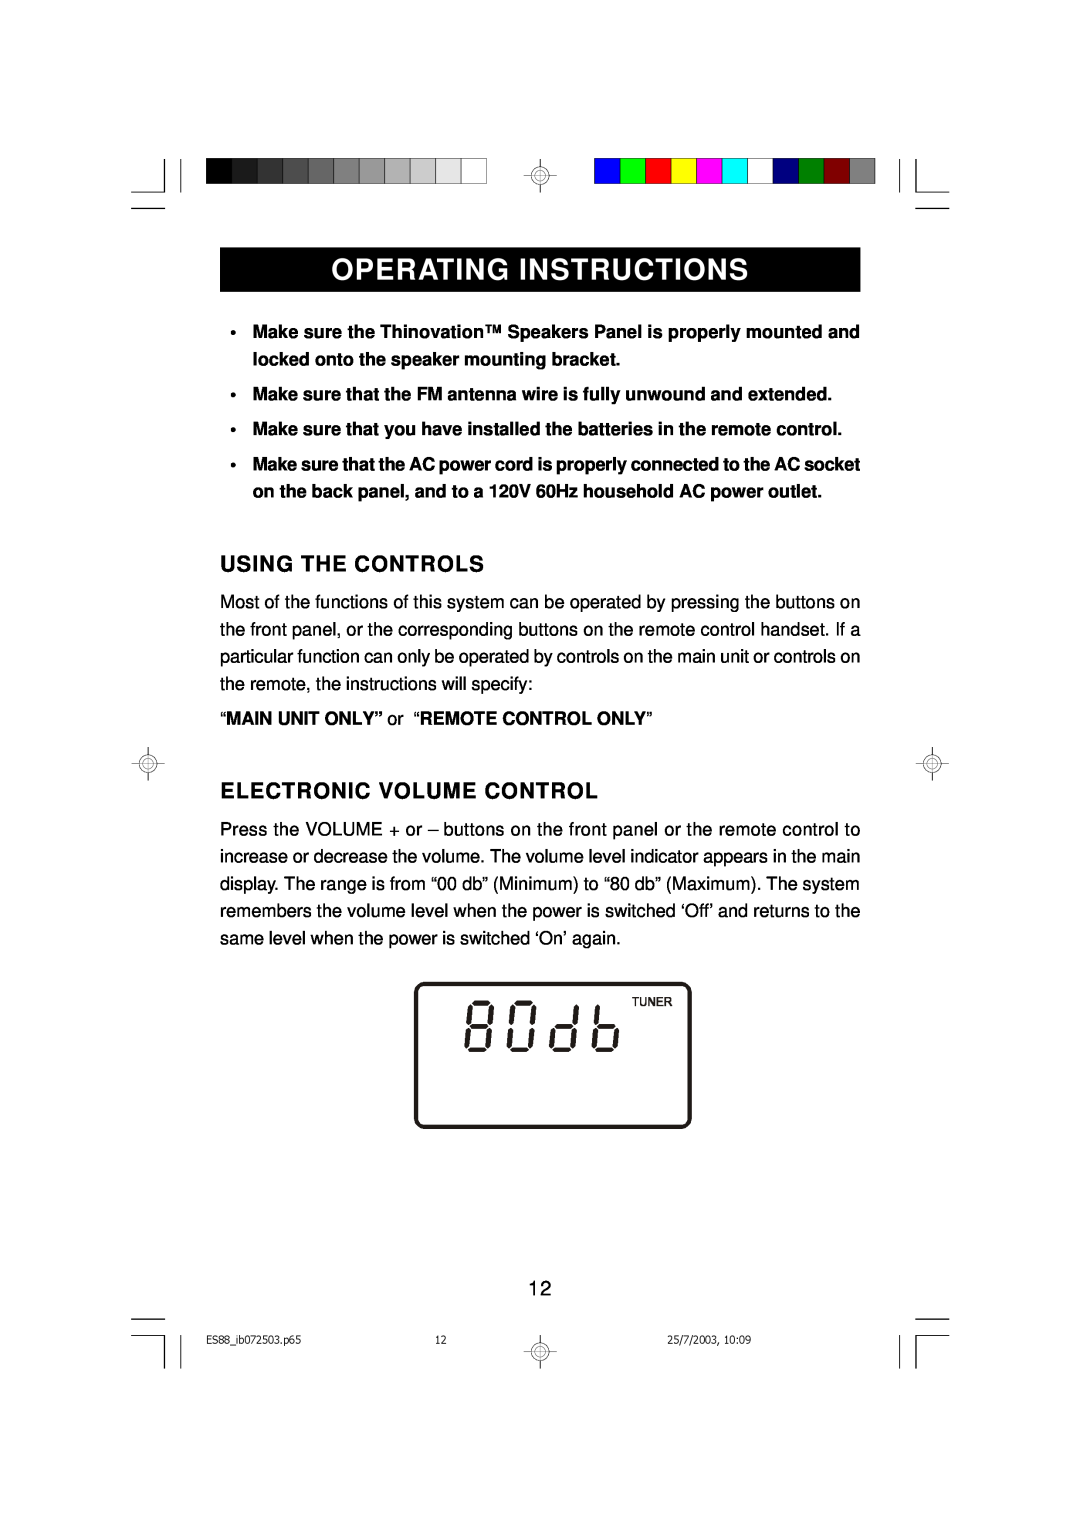 Emerson ES88 owner manual Operating Instructions, Using The Controls, Electronic Volume Control 